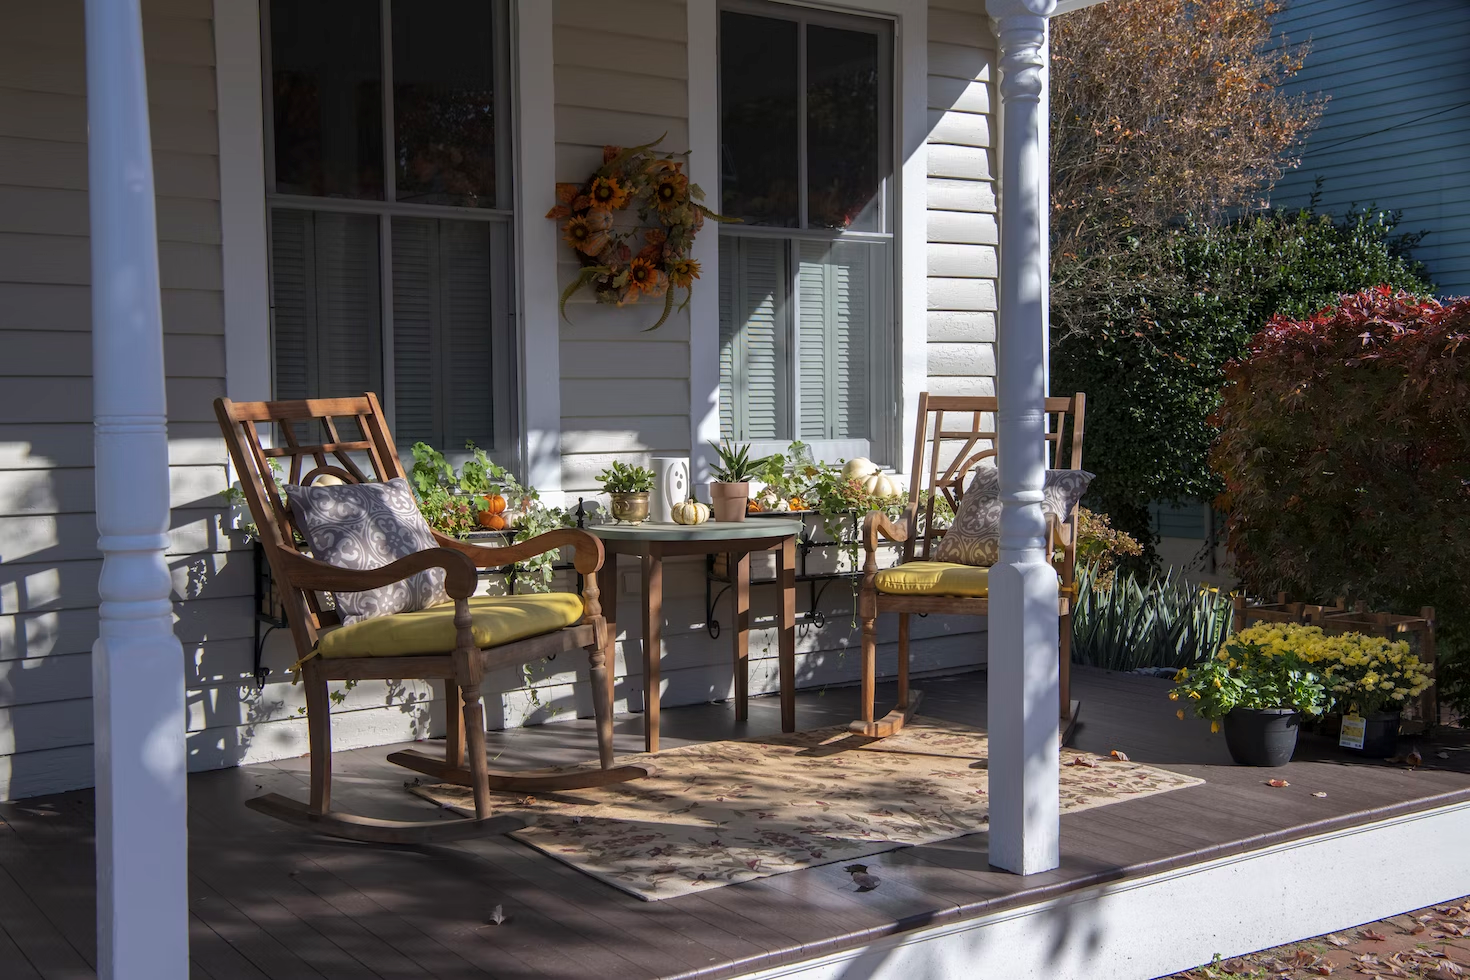 Fall Decor and Memories To Brighten Your Home